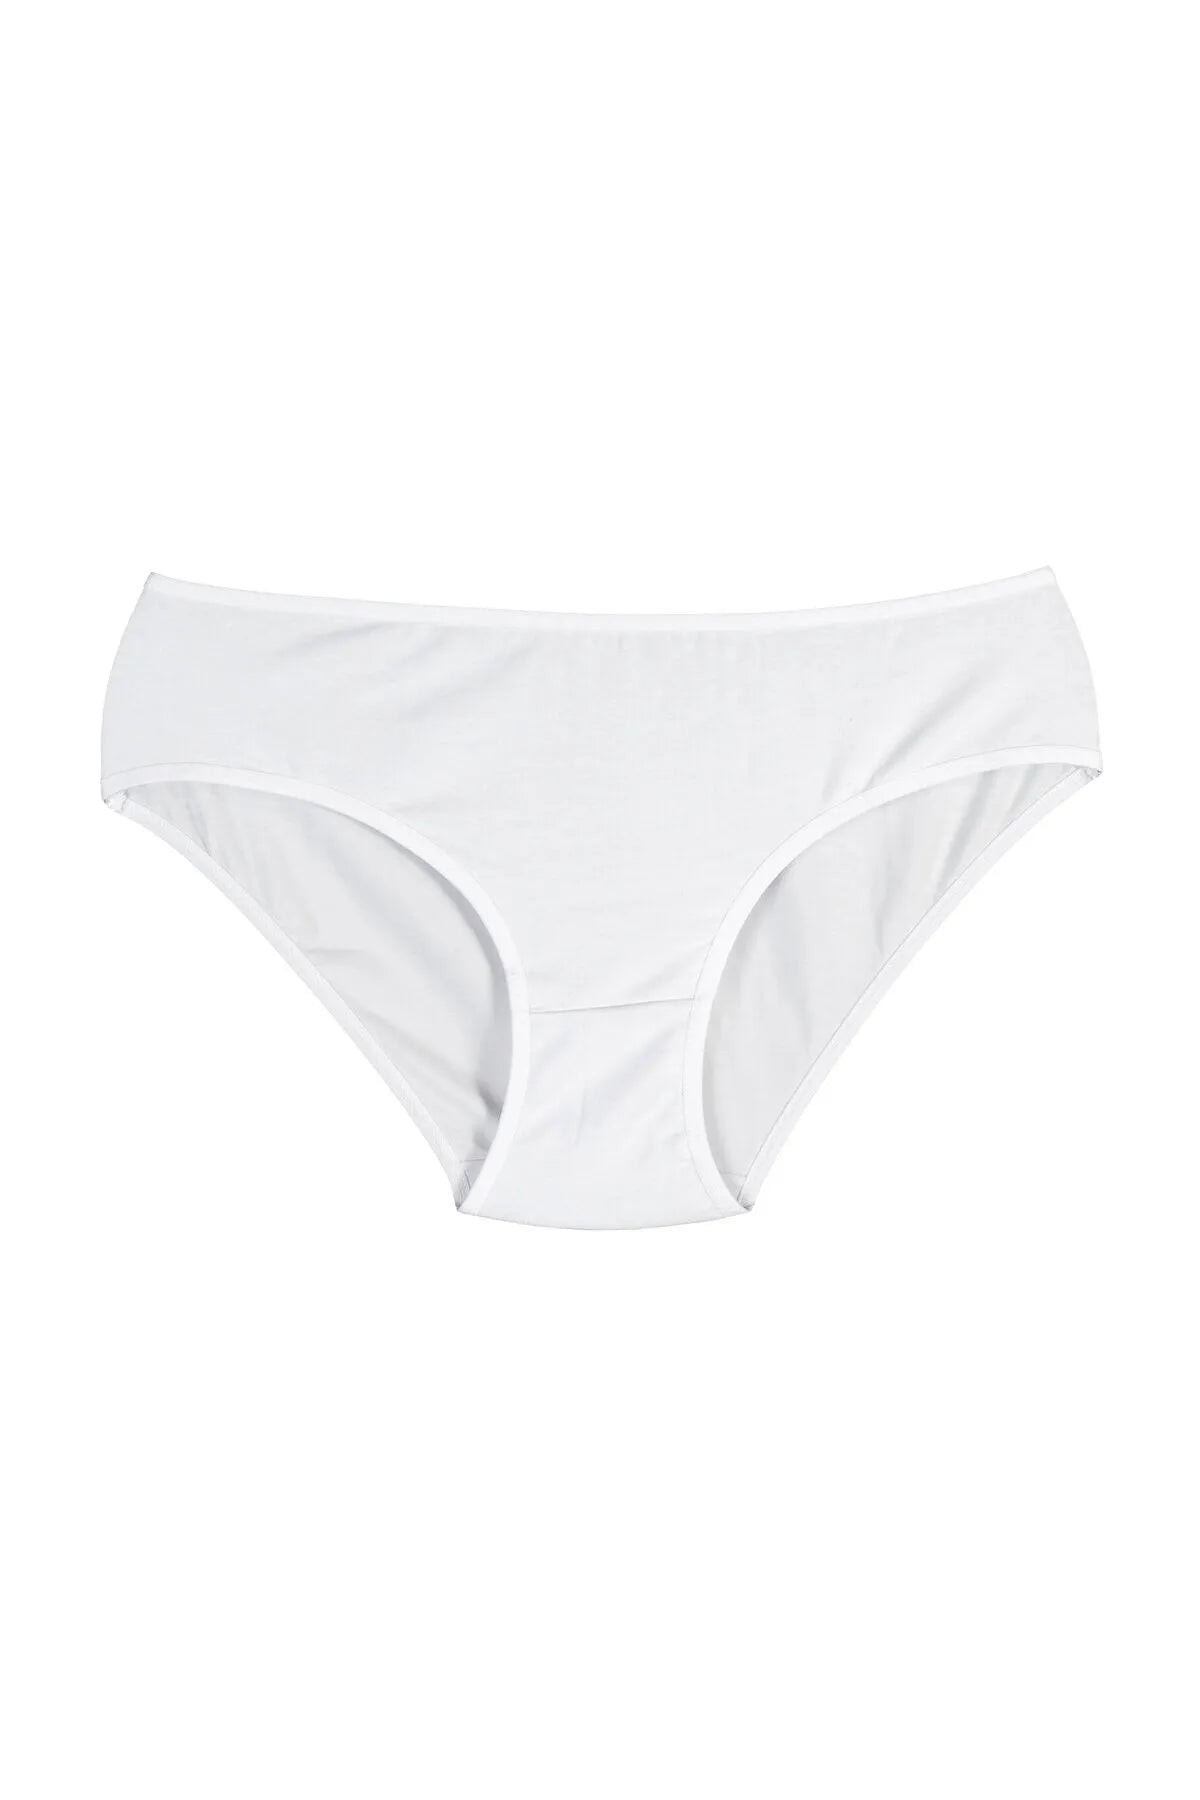 Cover 3-Piece White Slip Panties: Essential Comfort and Style for Every Woman